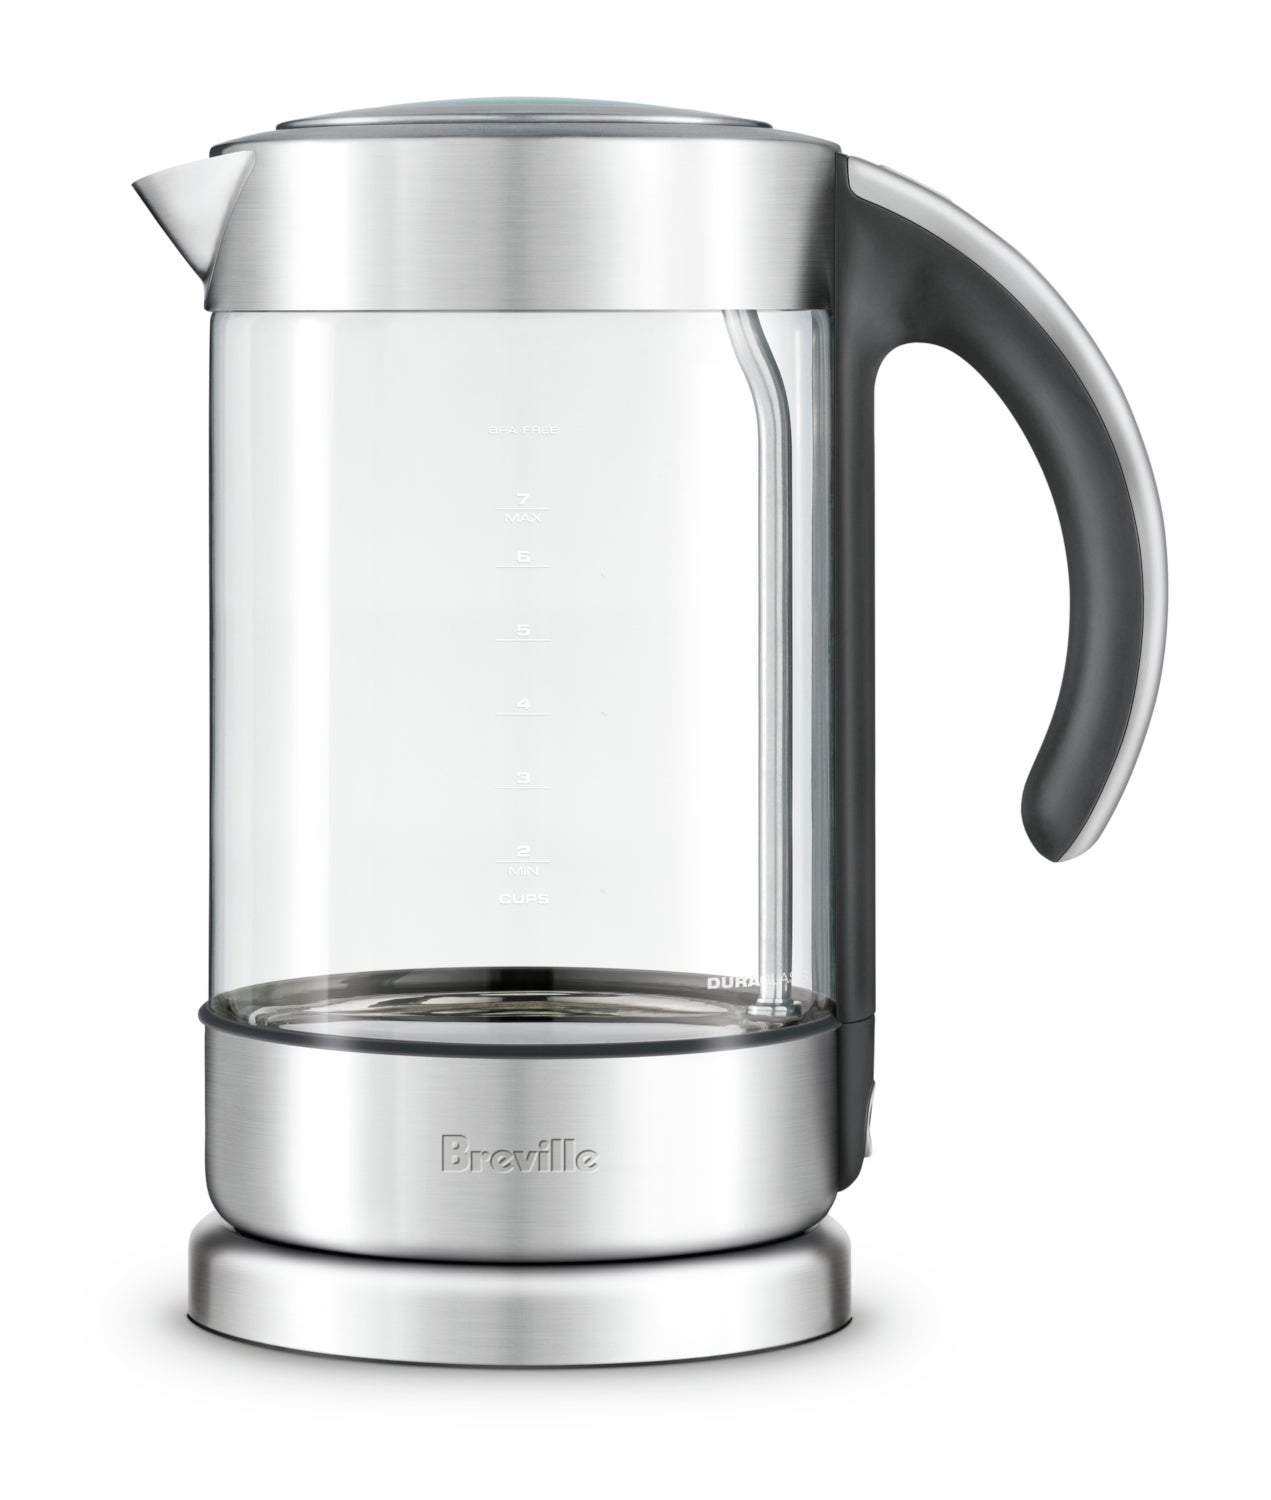 Breville the Crystal Clear - BKE750CLR 